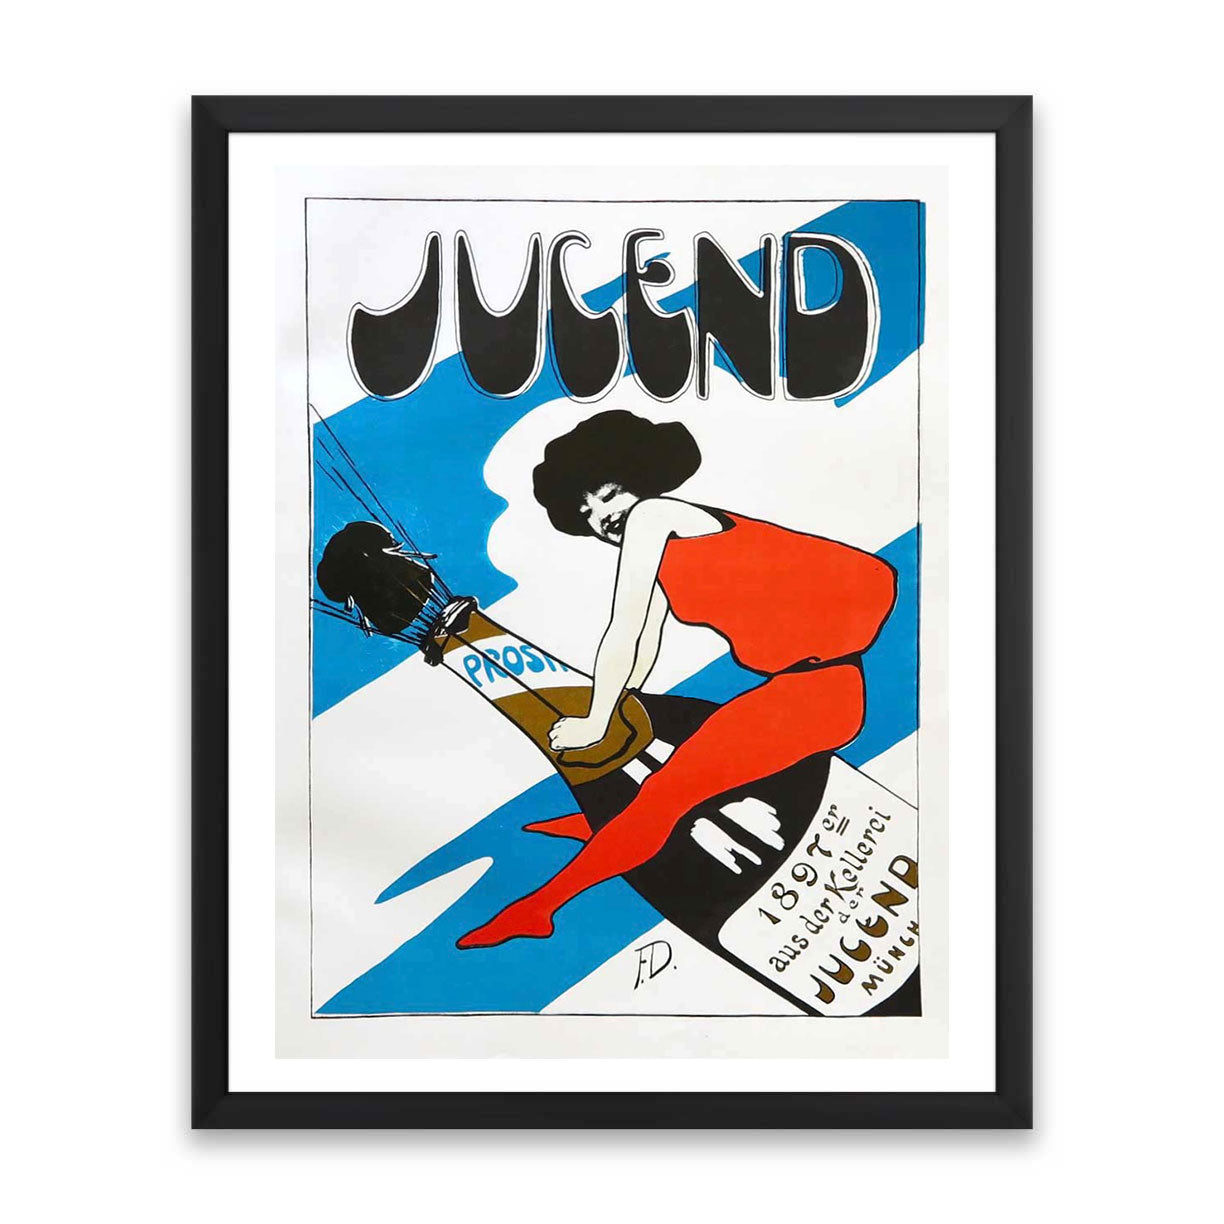 Jucend by Found Art-Found Art-Poster Child Prints